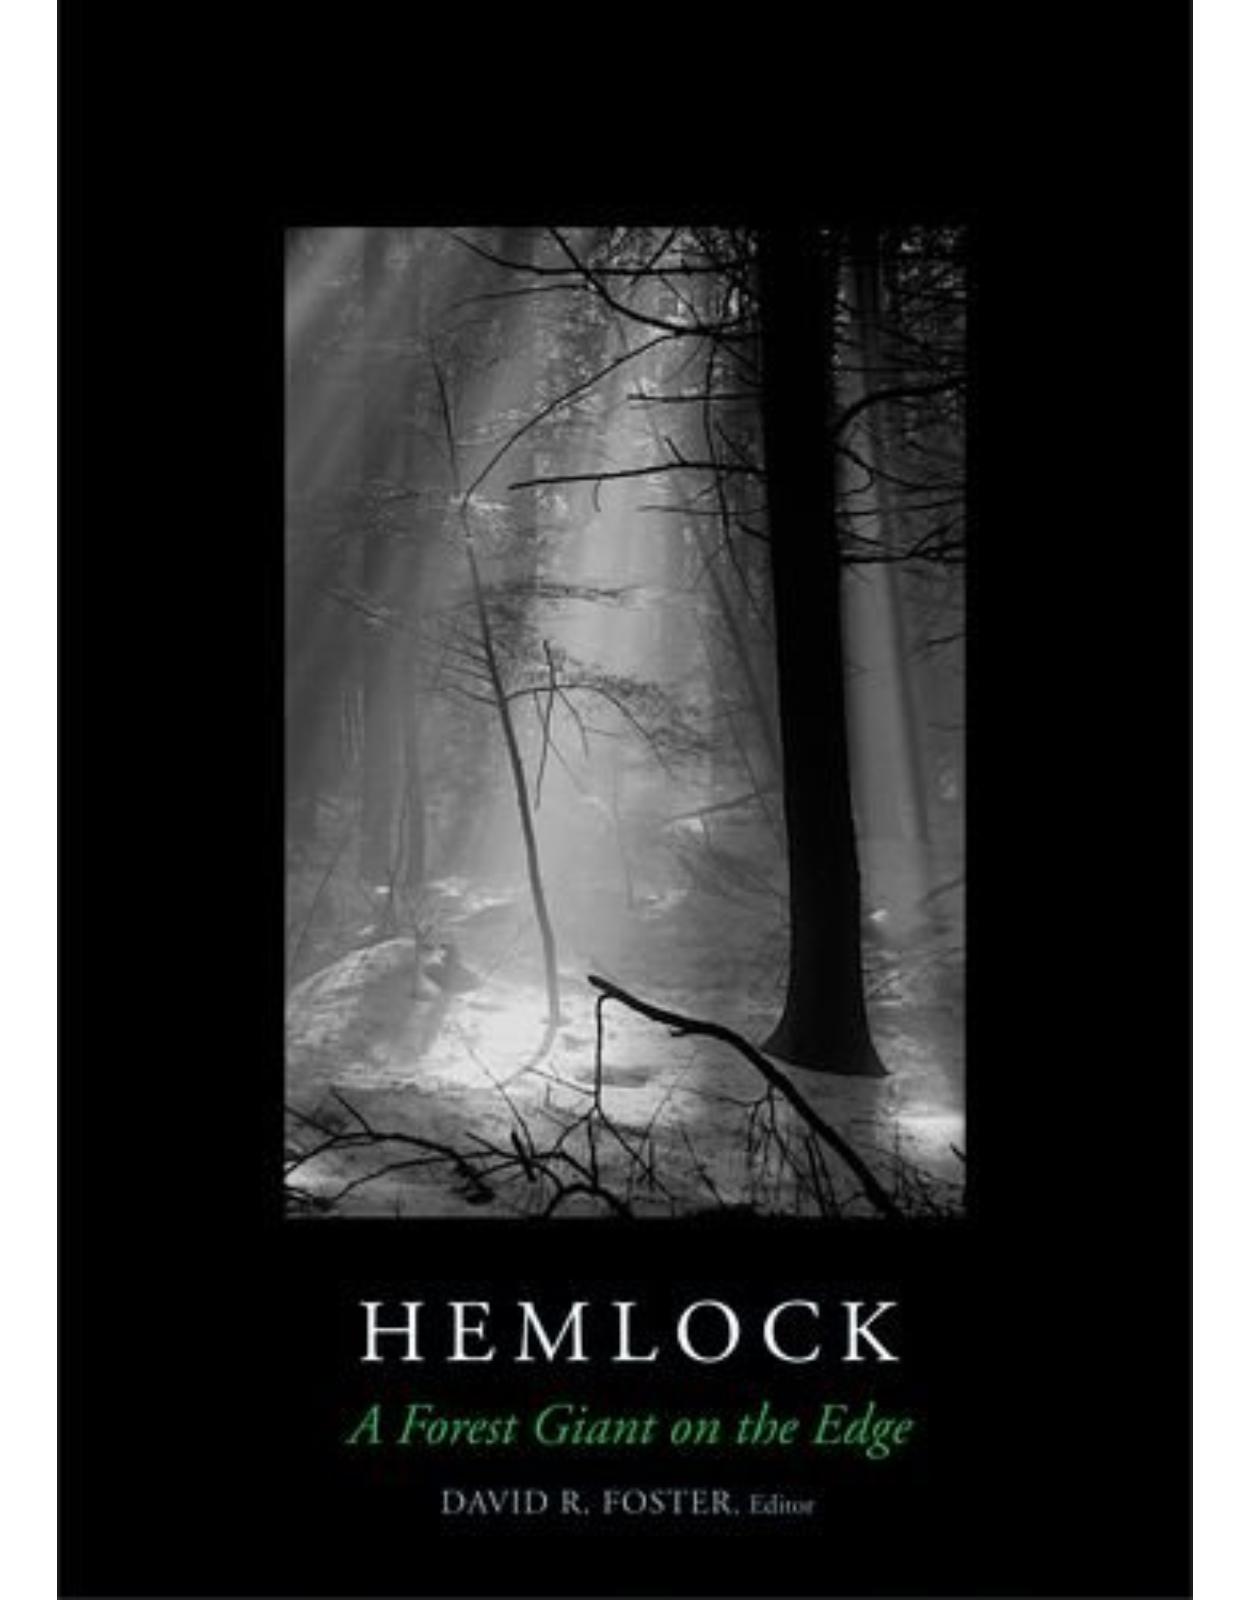 Hemlock. A Forest Giant on the Edge